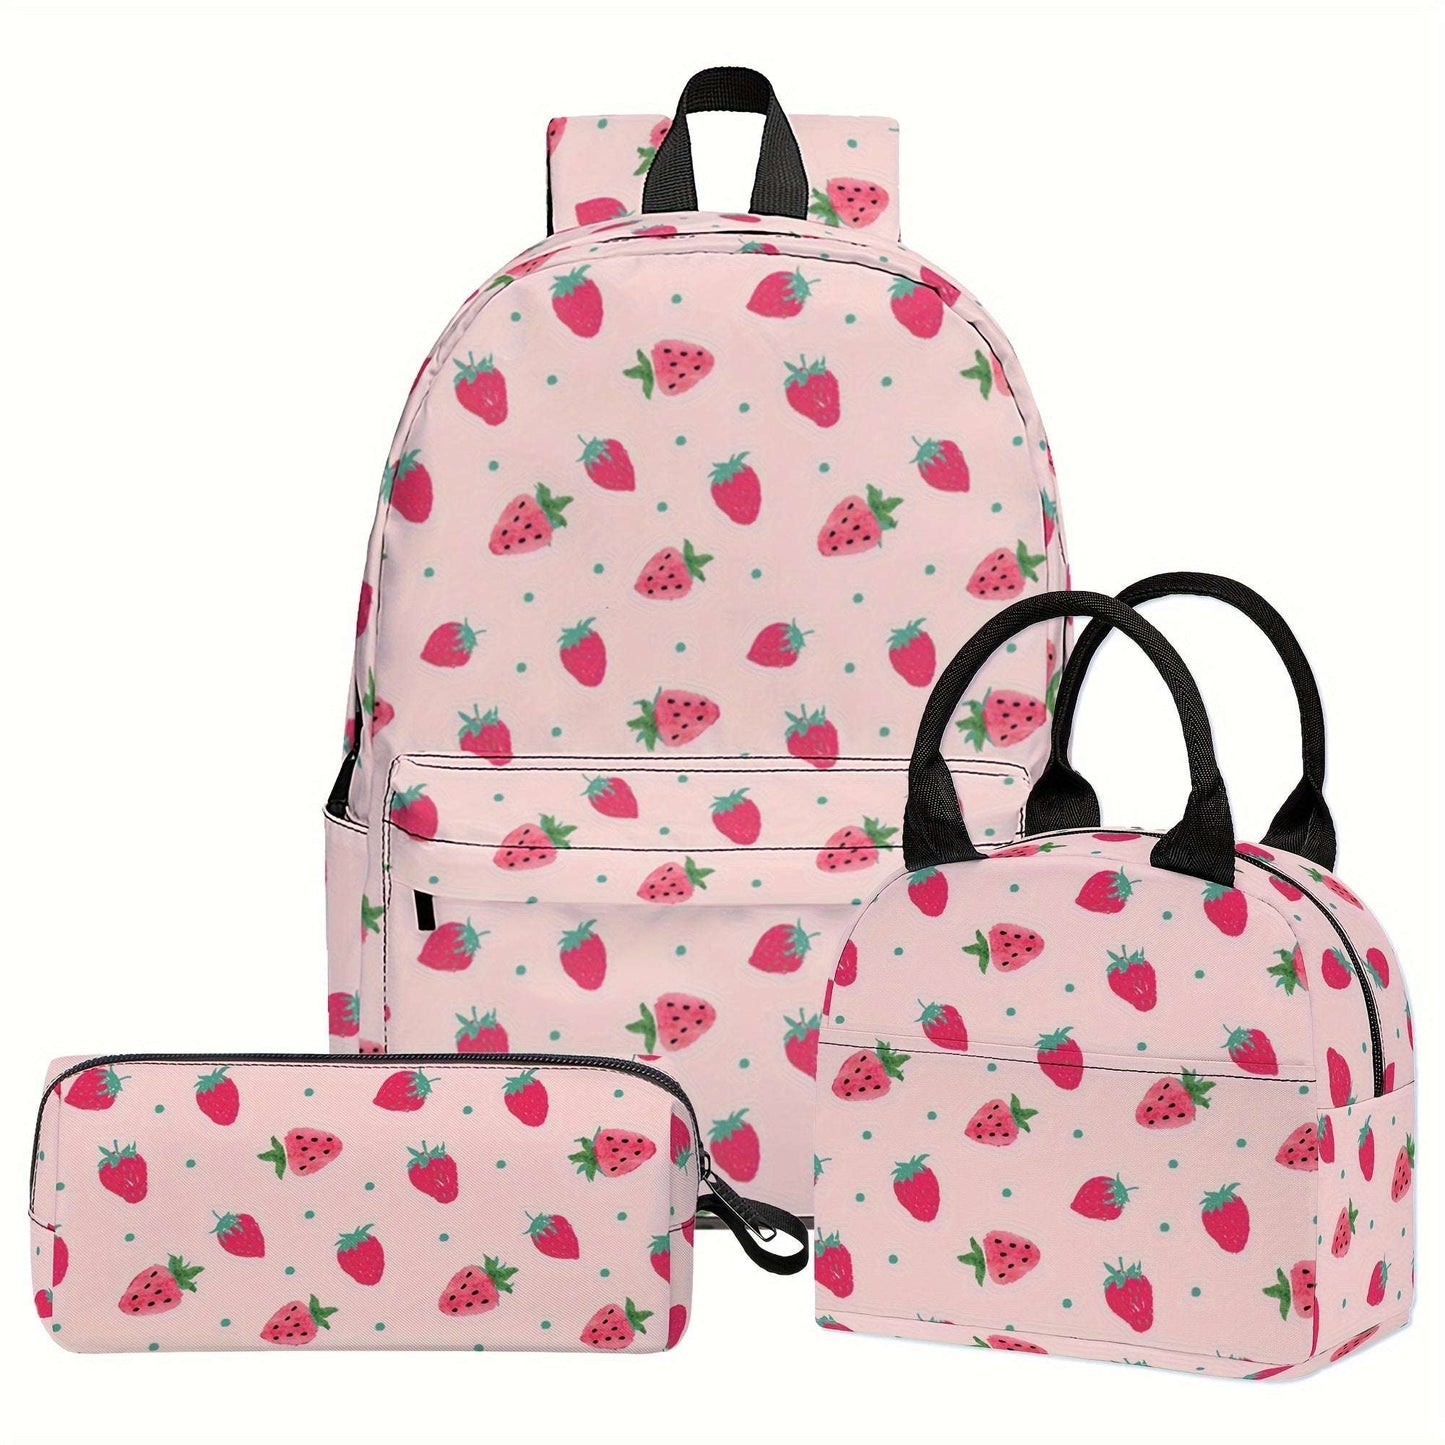 3Pcs Cute Cool School Backpack Set With Lunch Bag Pencil Case, Large Capacity 17 Inch Backpack 36 Backpack OK•PhotoFineArt OK•PhotoFineArt